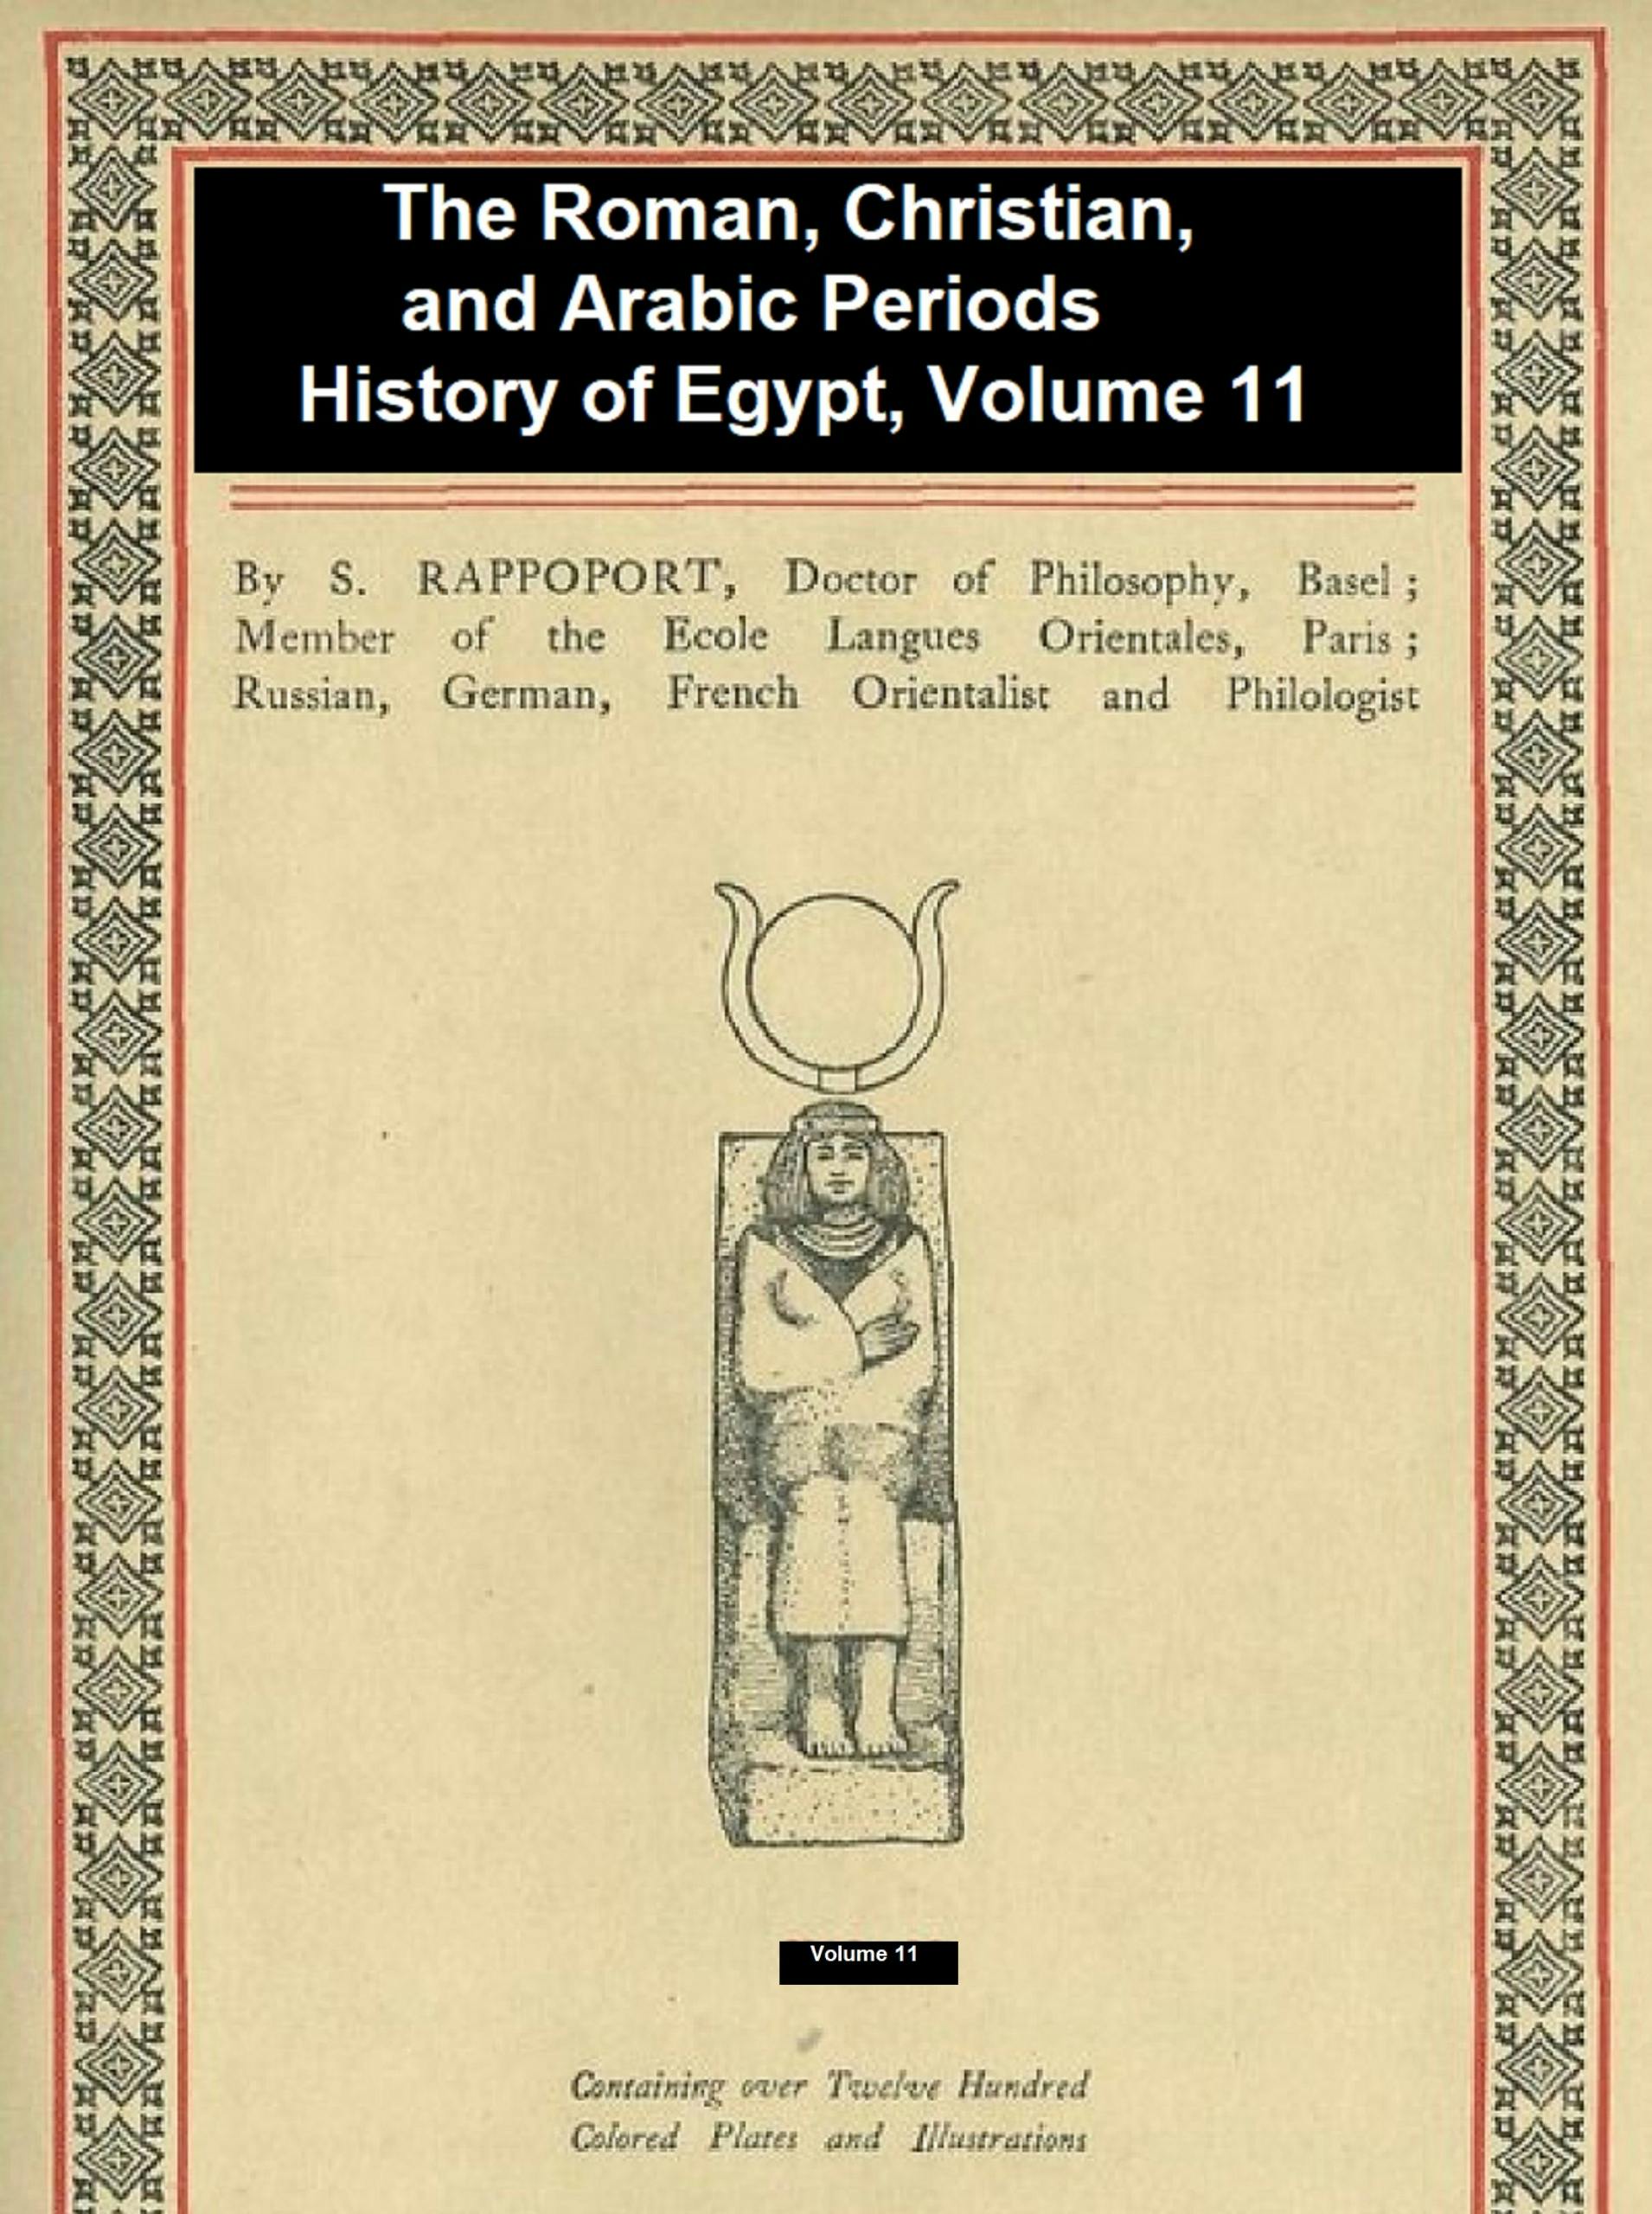 The Roman, Christian, and Arabic Periods, History of Egypt Vol. 11 - Angelo Solomon Rappoport